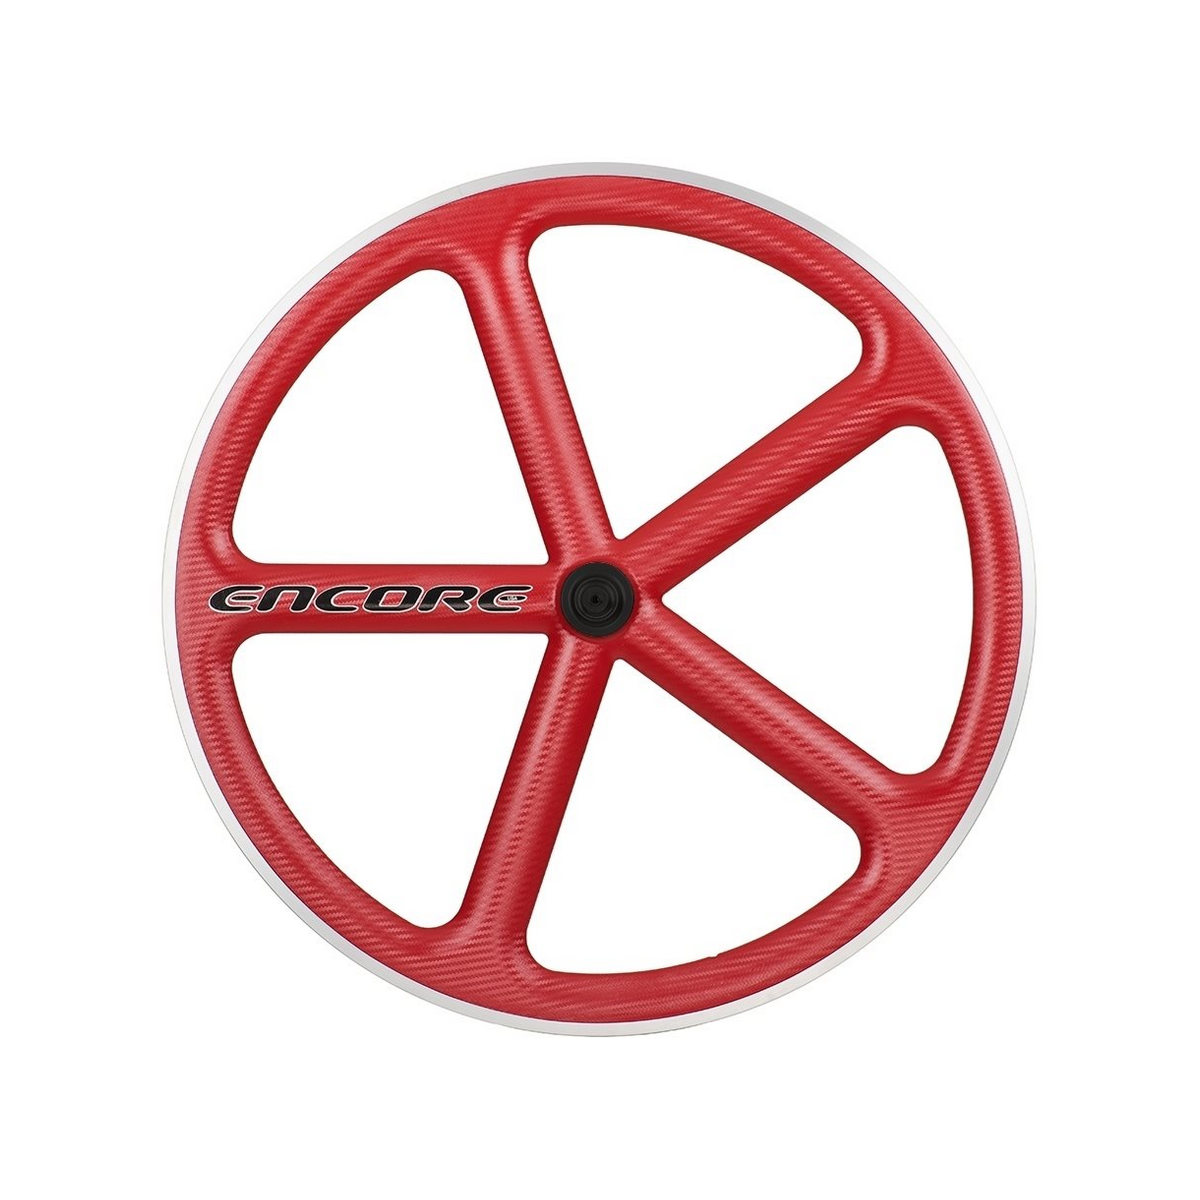 rear wheel 700c track 5 spokes carbon weave red msw